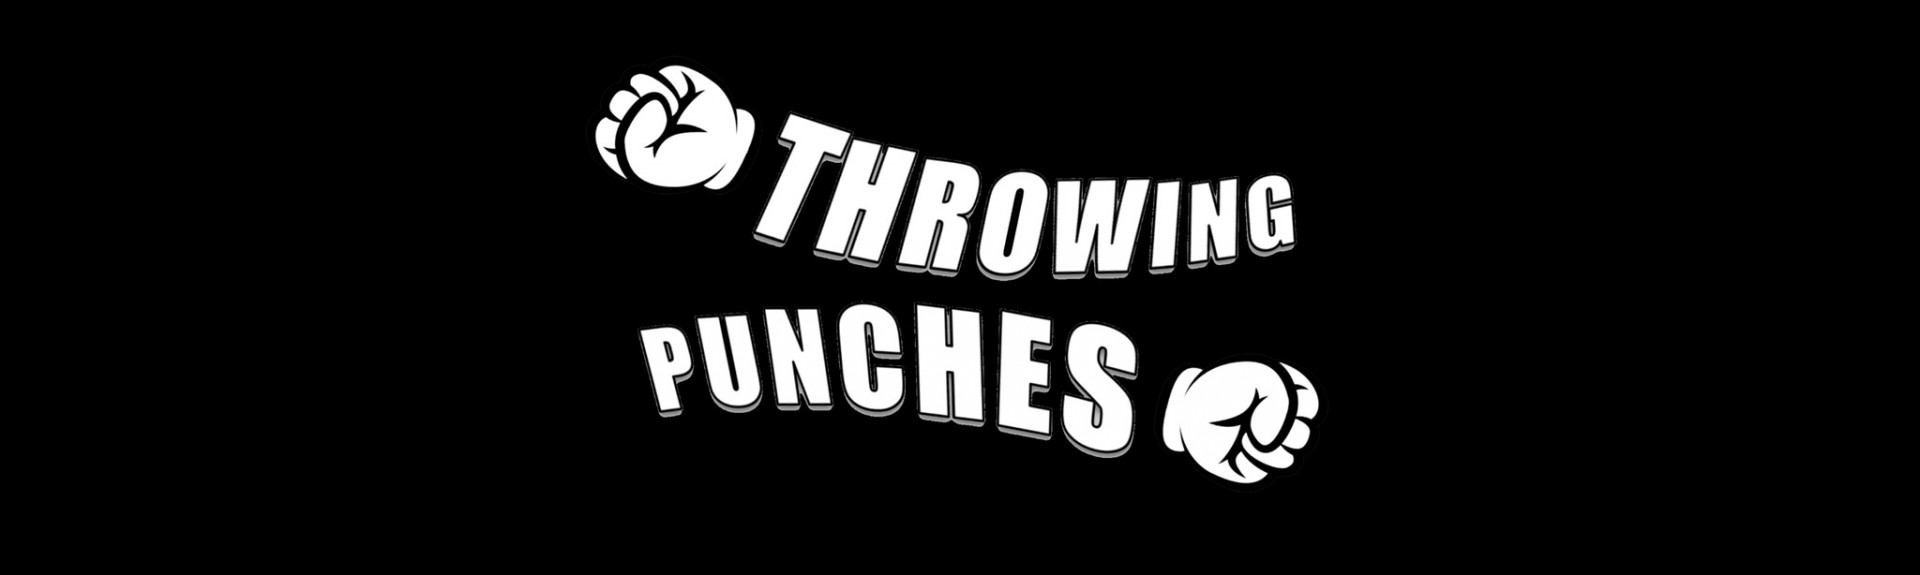 Throwing Punches